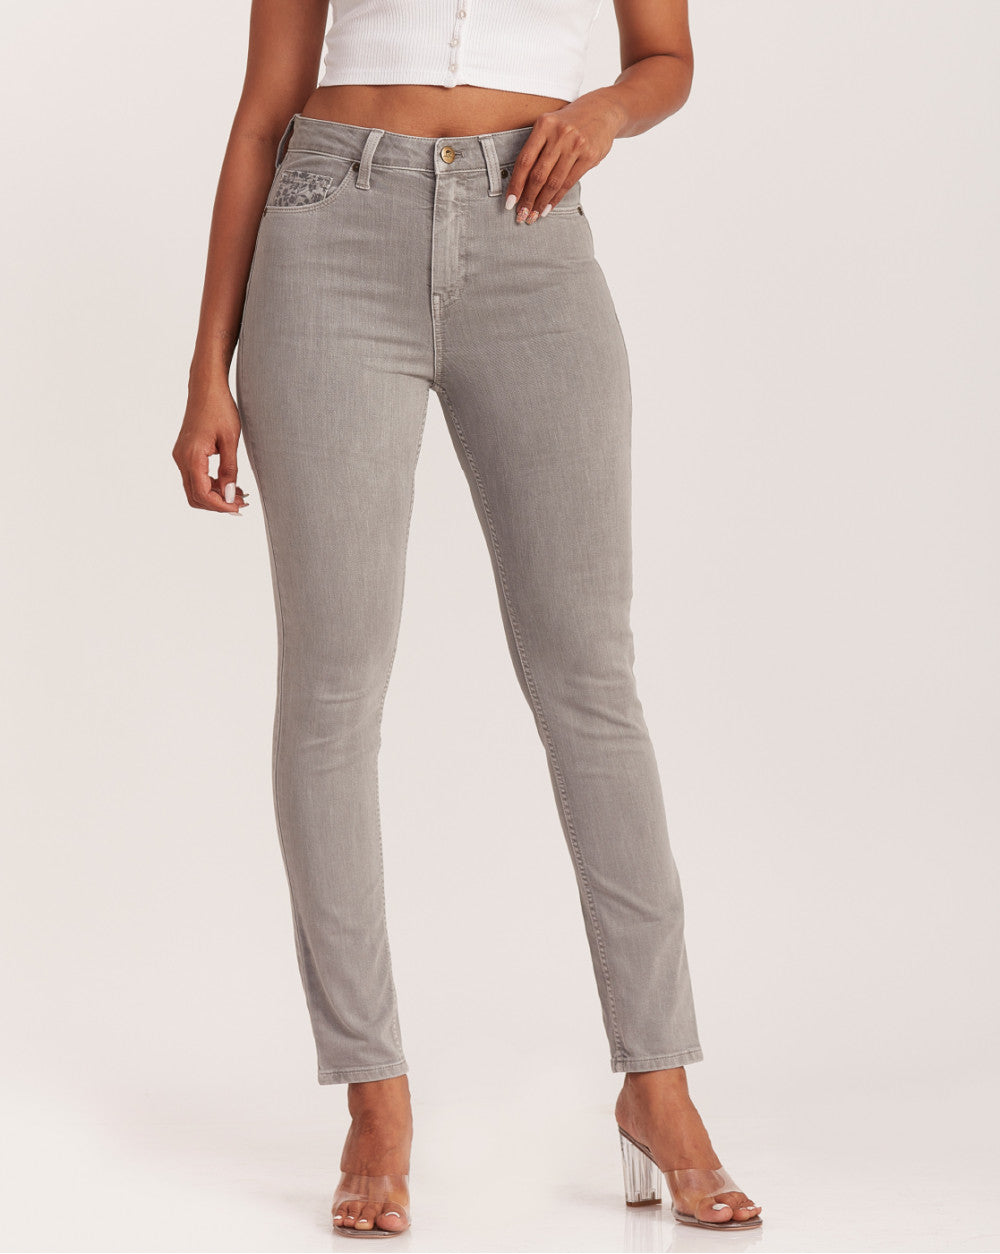 Skinny Fit High Waist Colored Jeans - Soft Grey